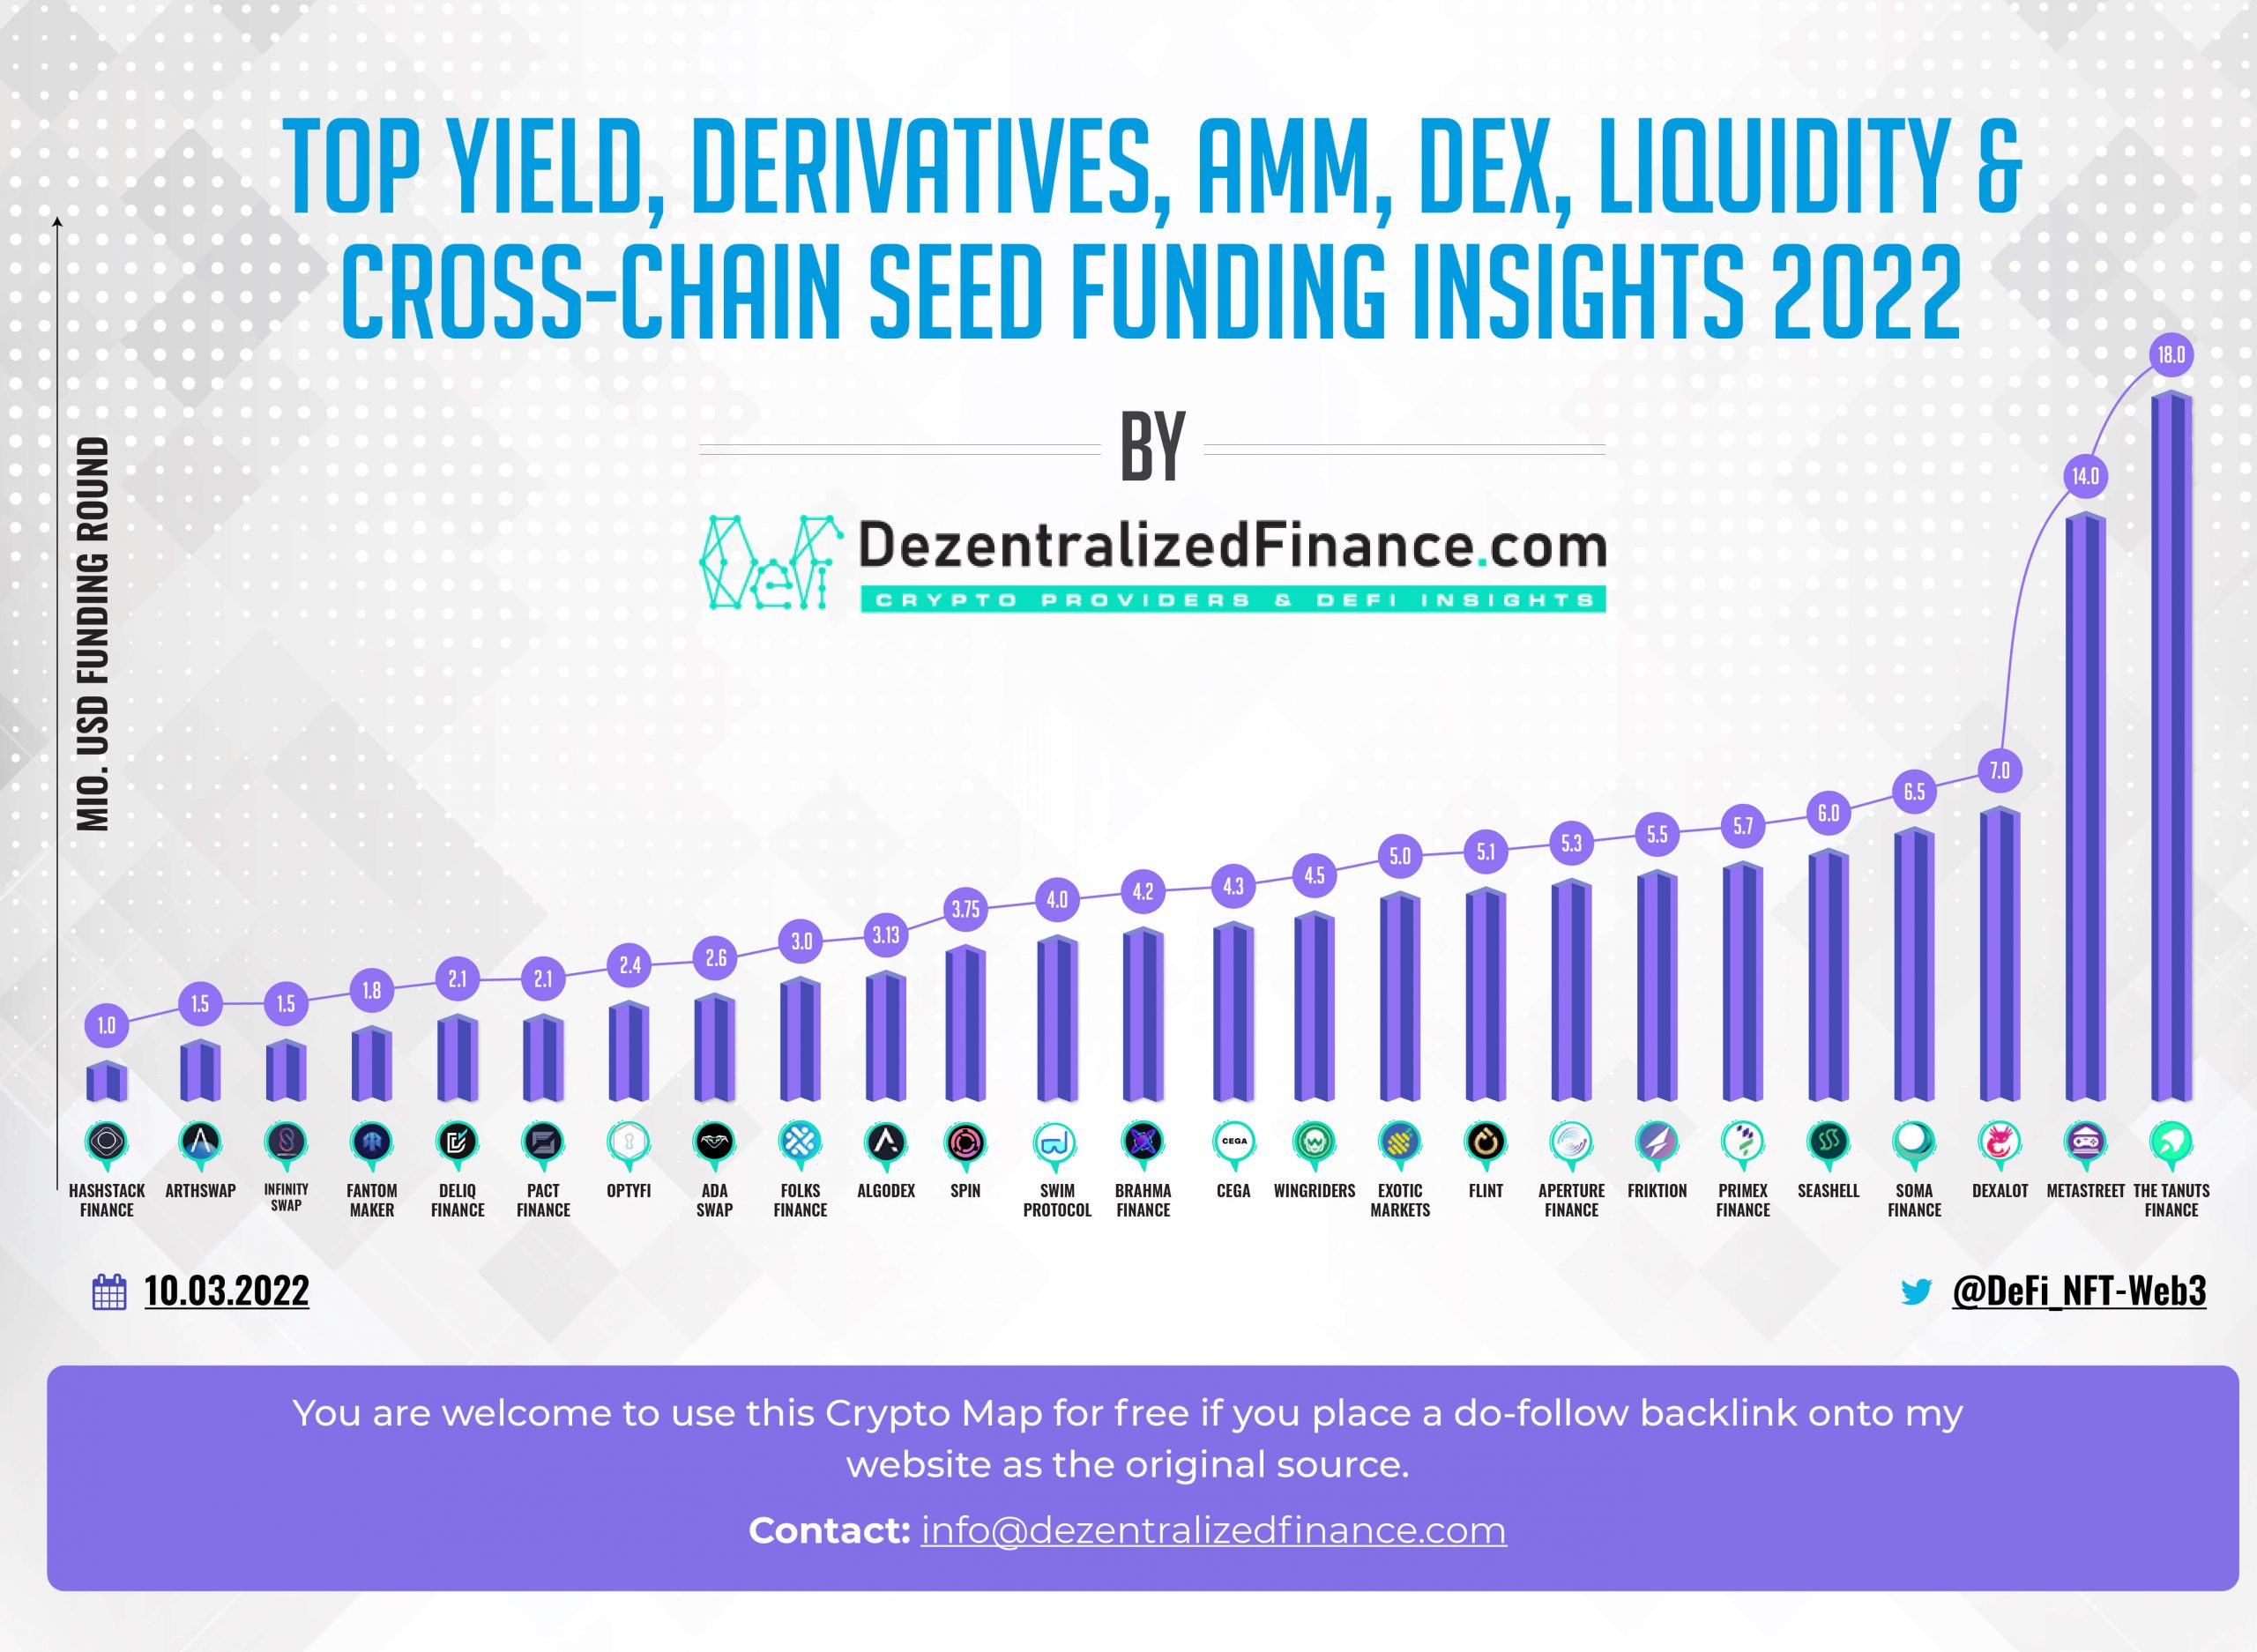 Top Yield Derivatives AMM DEX Liquidity & Cross-Chain Seed Funding Insights 2022